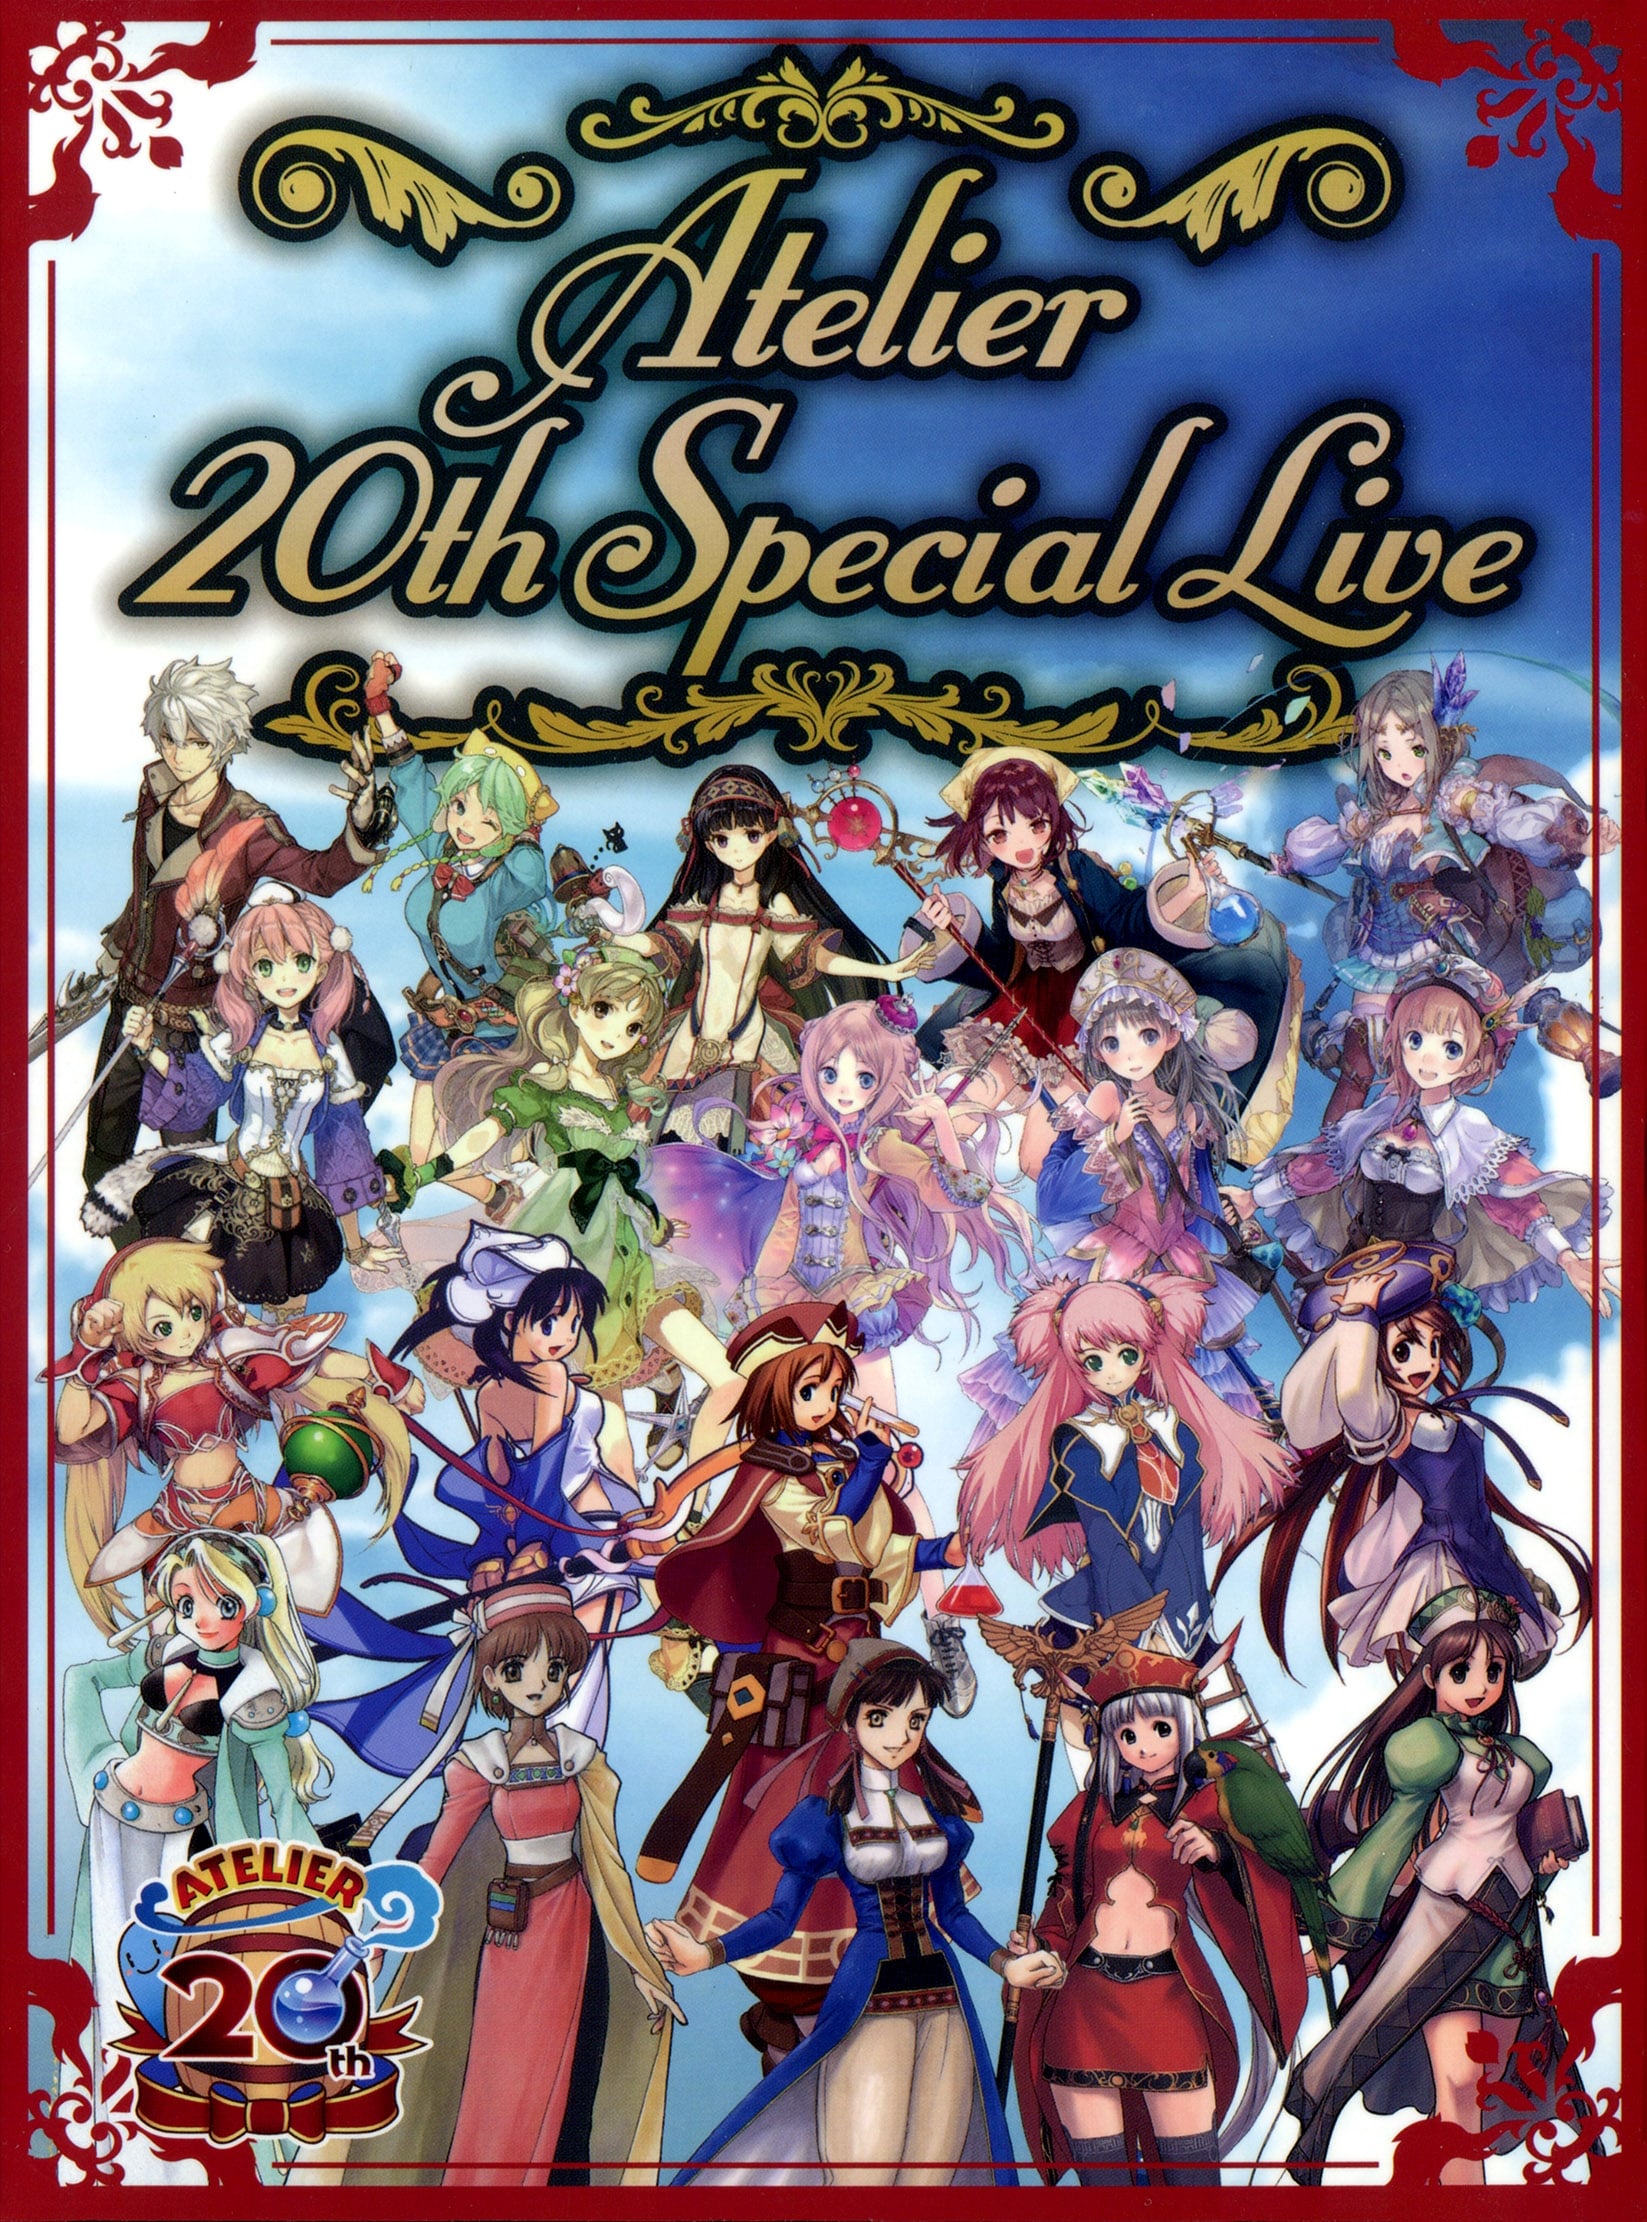 Atelier 20th Special Live (2017)